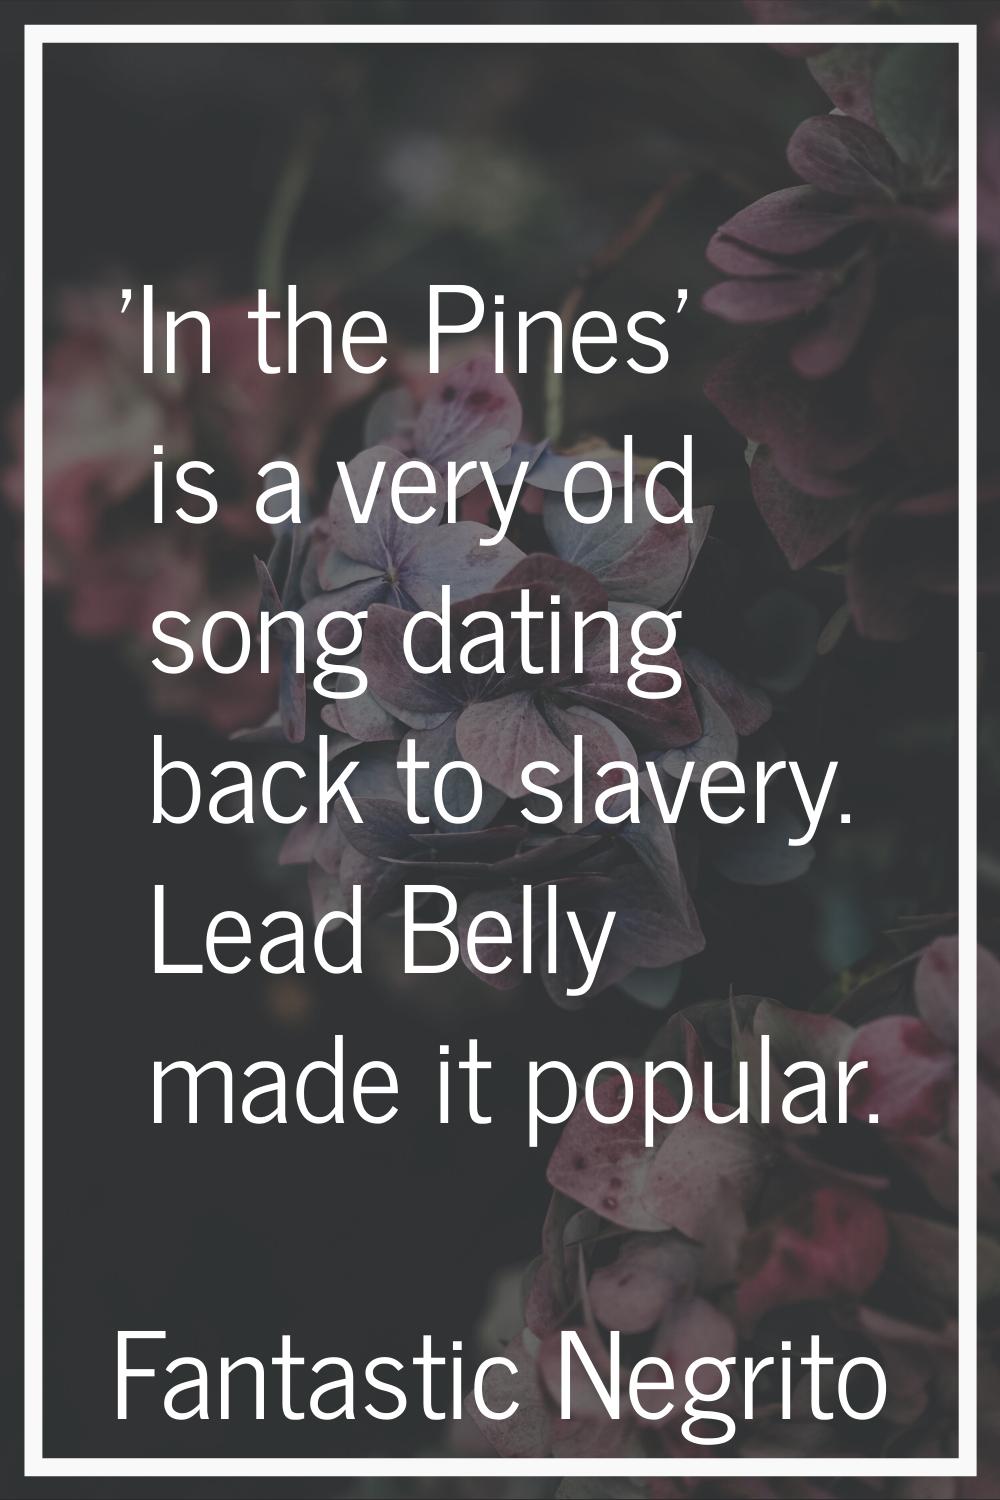 'In the Pines' is a very old song dating back to slavery. Lead Belly made it popular.